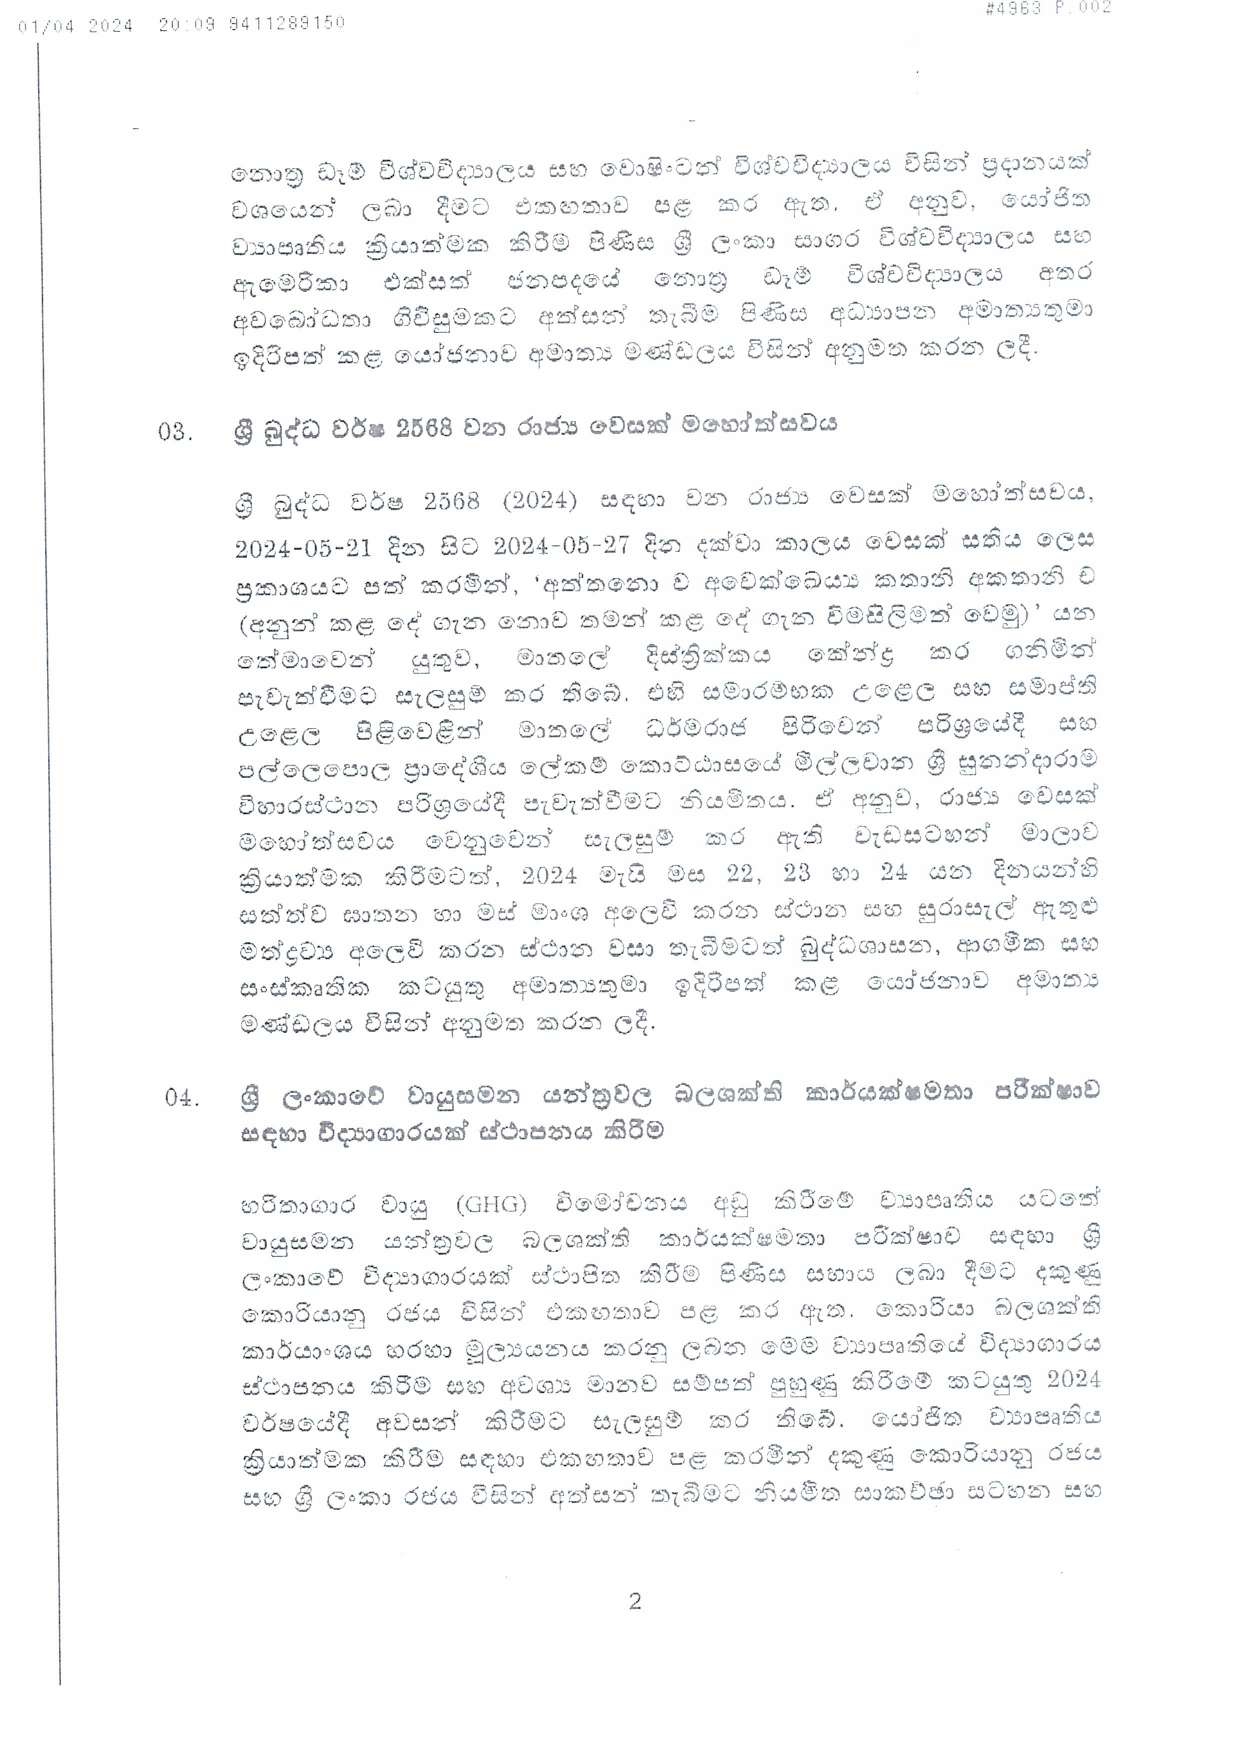 Cabinet Decisions on 01.04.2024 compressed page 0002